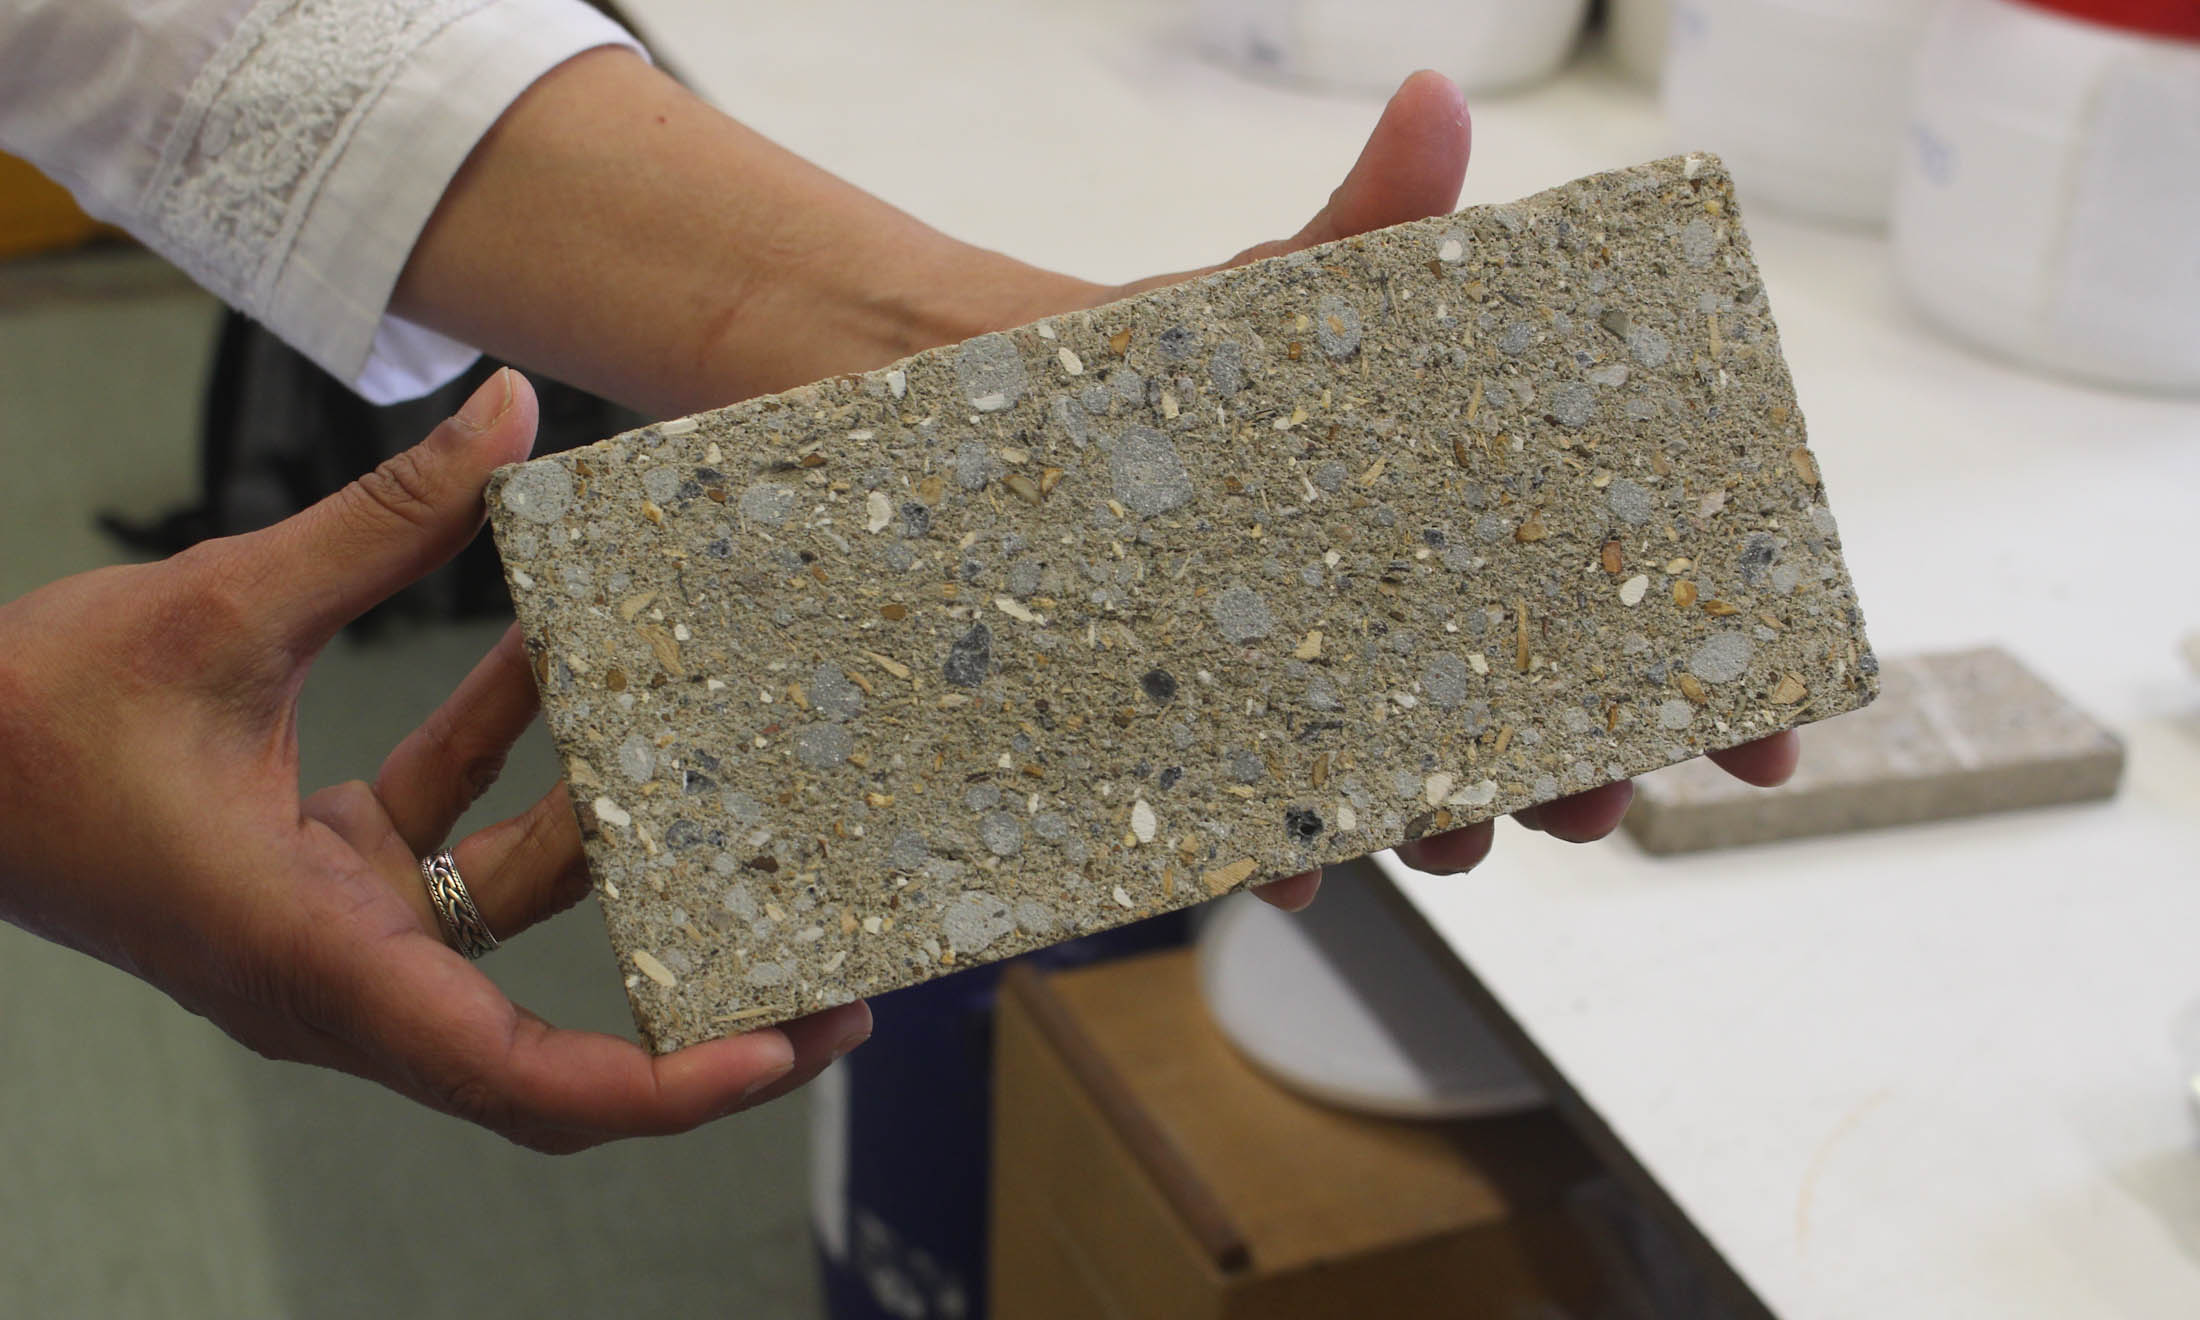 Brick made of low-carbon cement (Image: BBC)